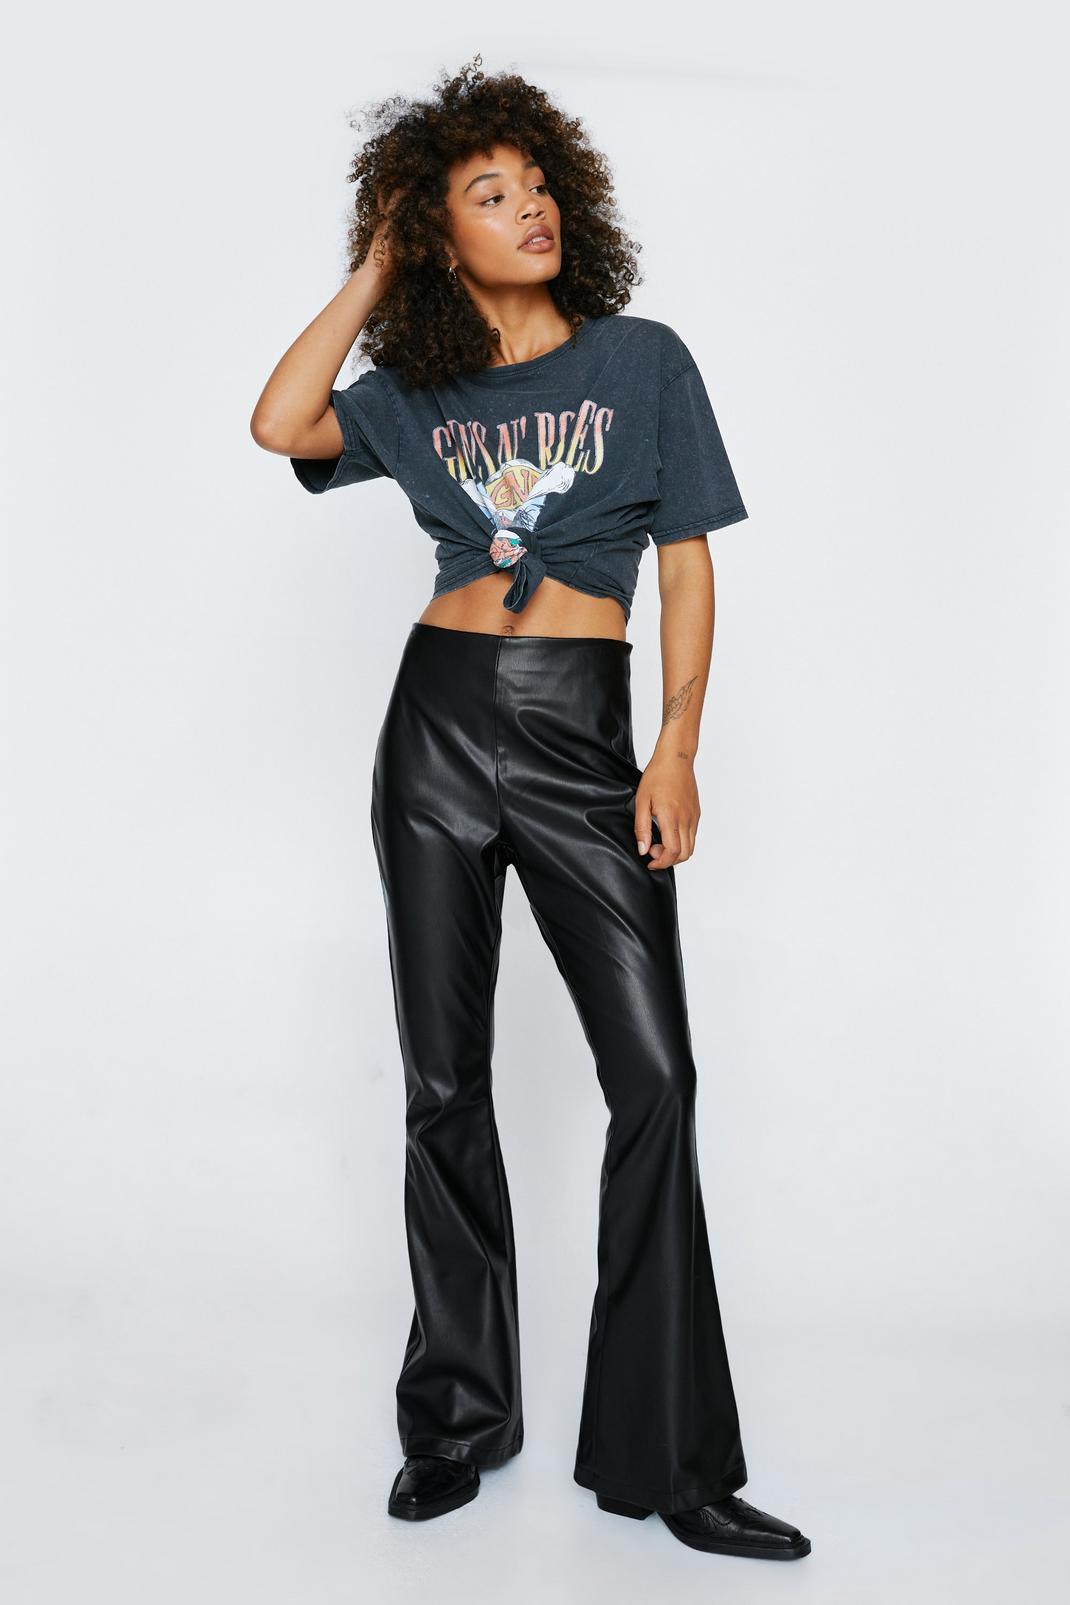 Topshop faux leather lace up flare pants in black, ASOS